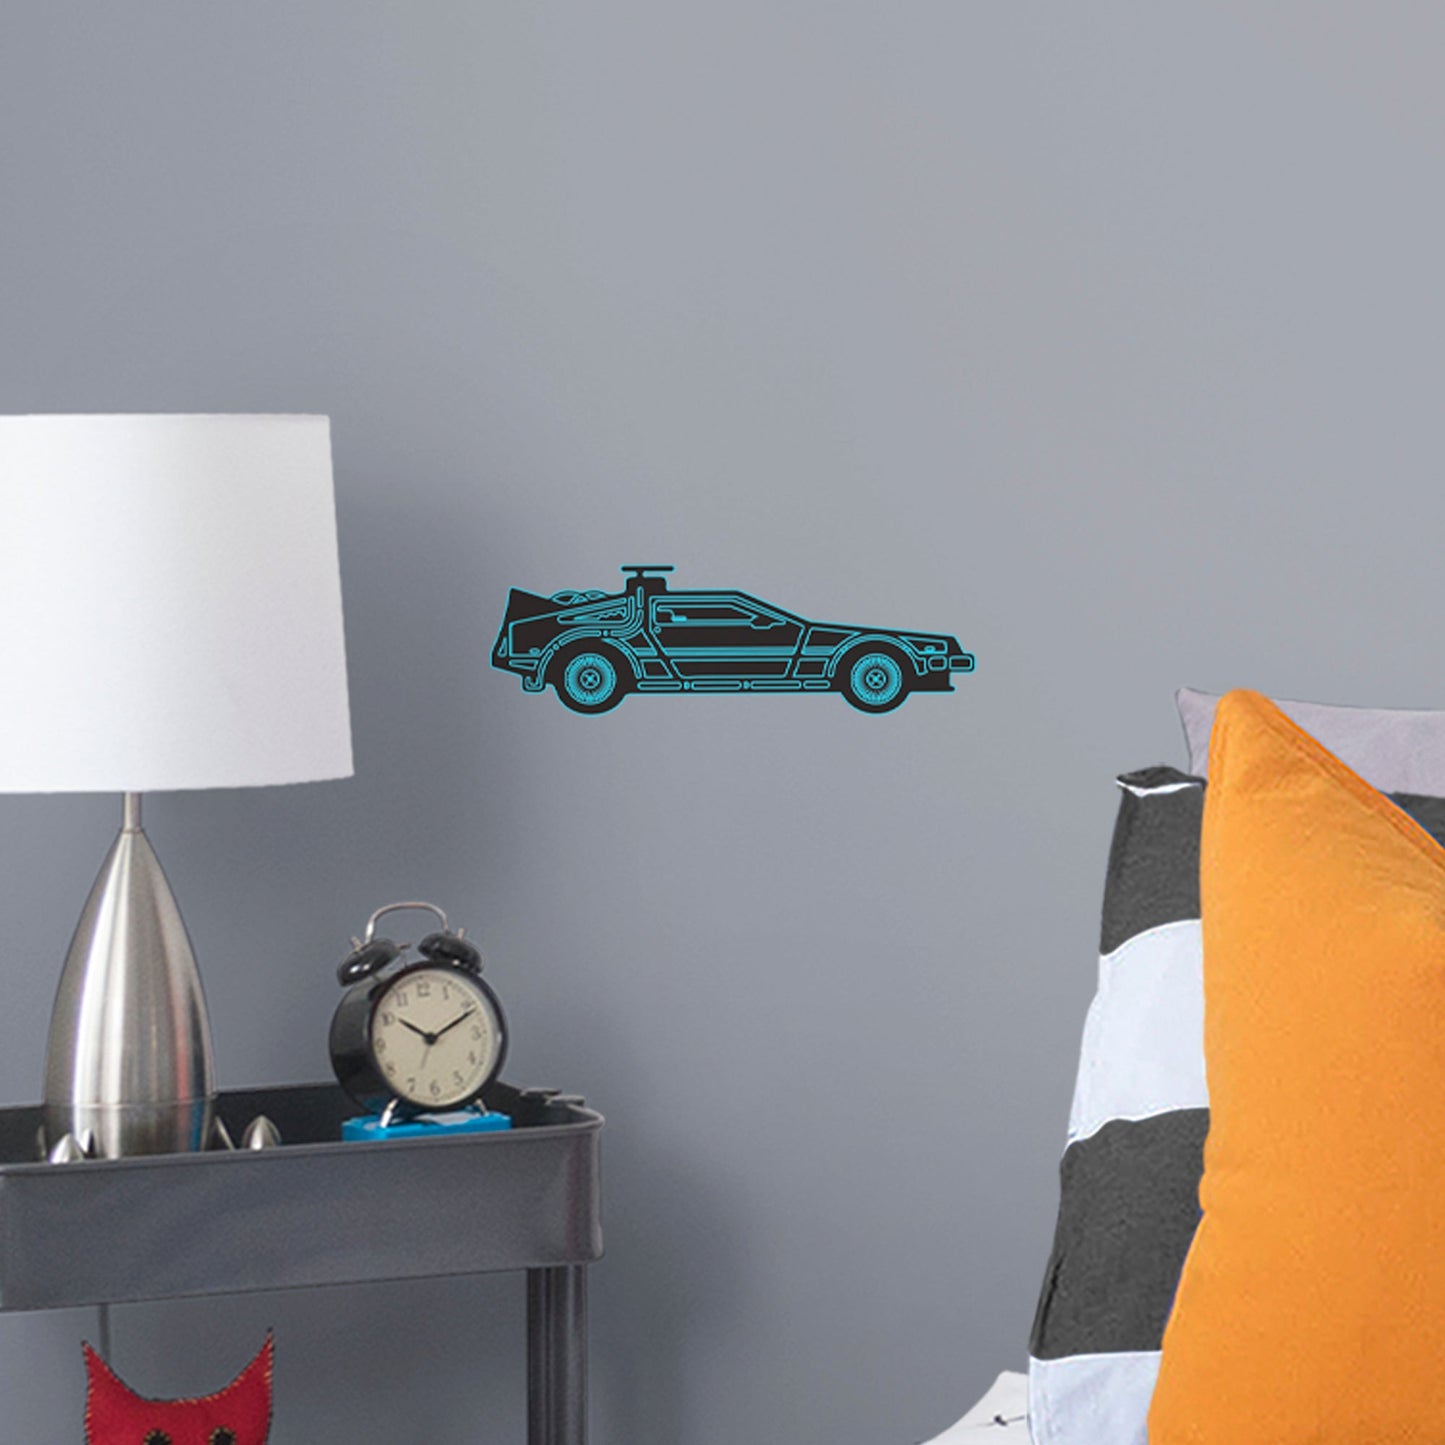 Back to the Future: DeLorean Time Machine Iii Mural        - Officially Licensed NBC Universal Removable Wall   Adhesive Decal